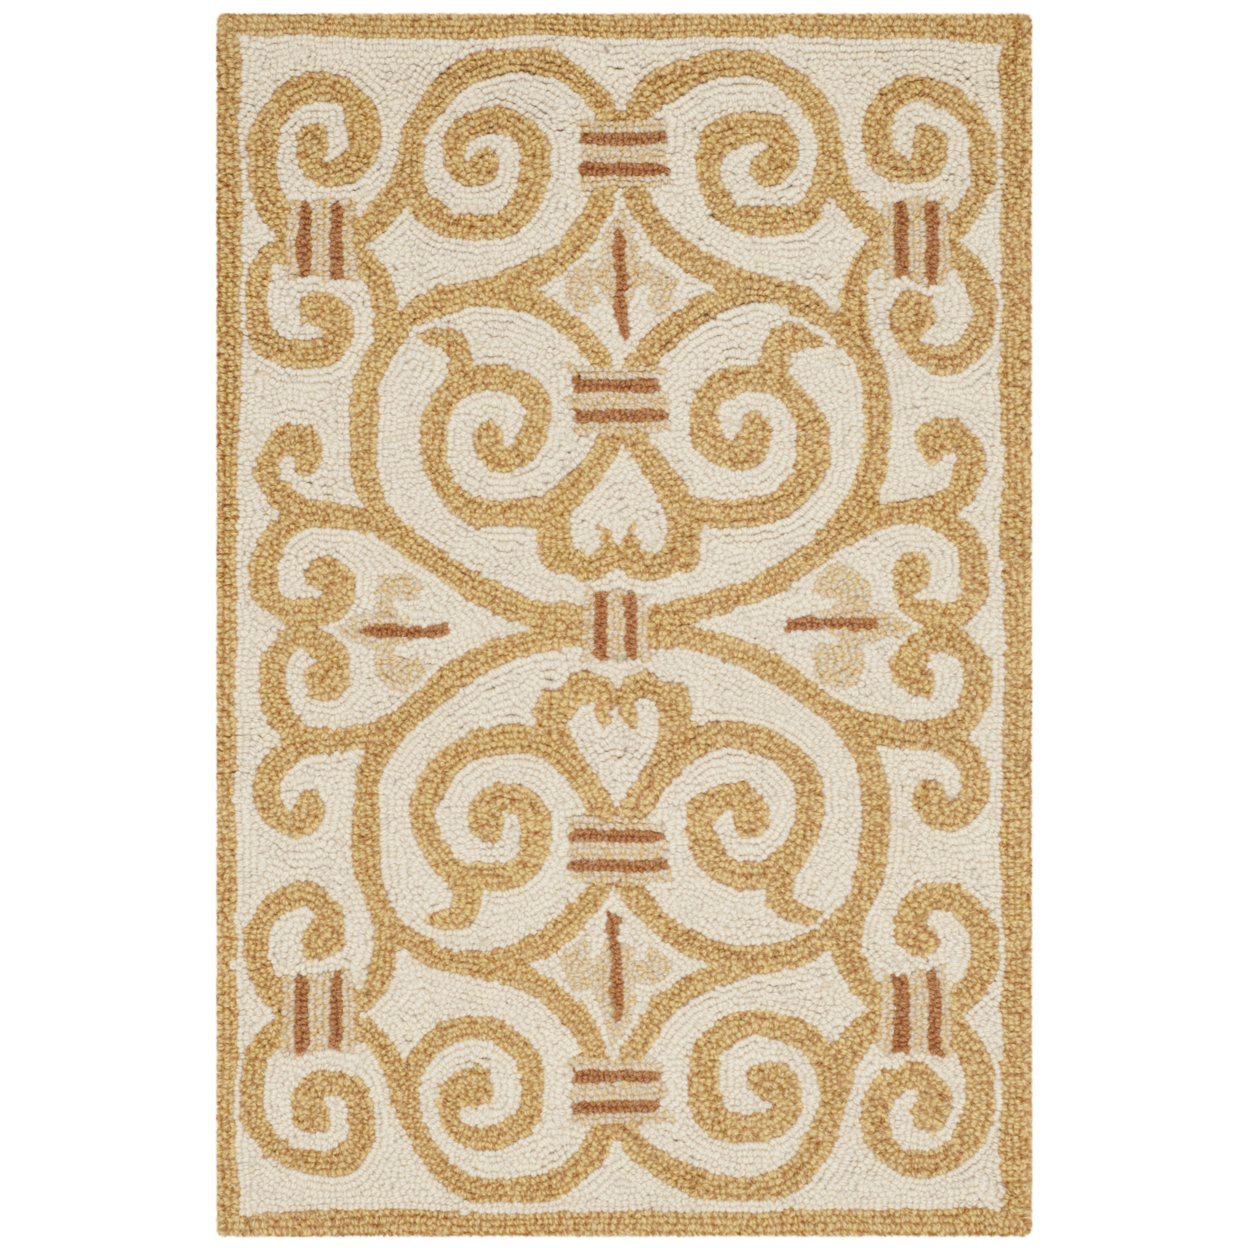 SAFAVIEH Chelsea HK11P Hand-hooked Ivory / Gold Rug - 4' 6 X 6' 6 Oval